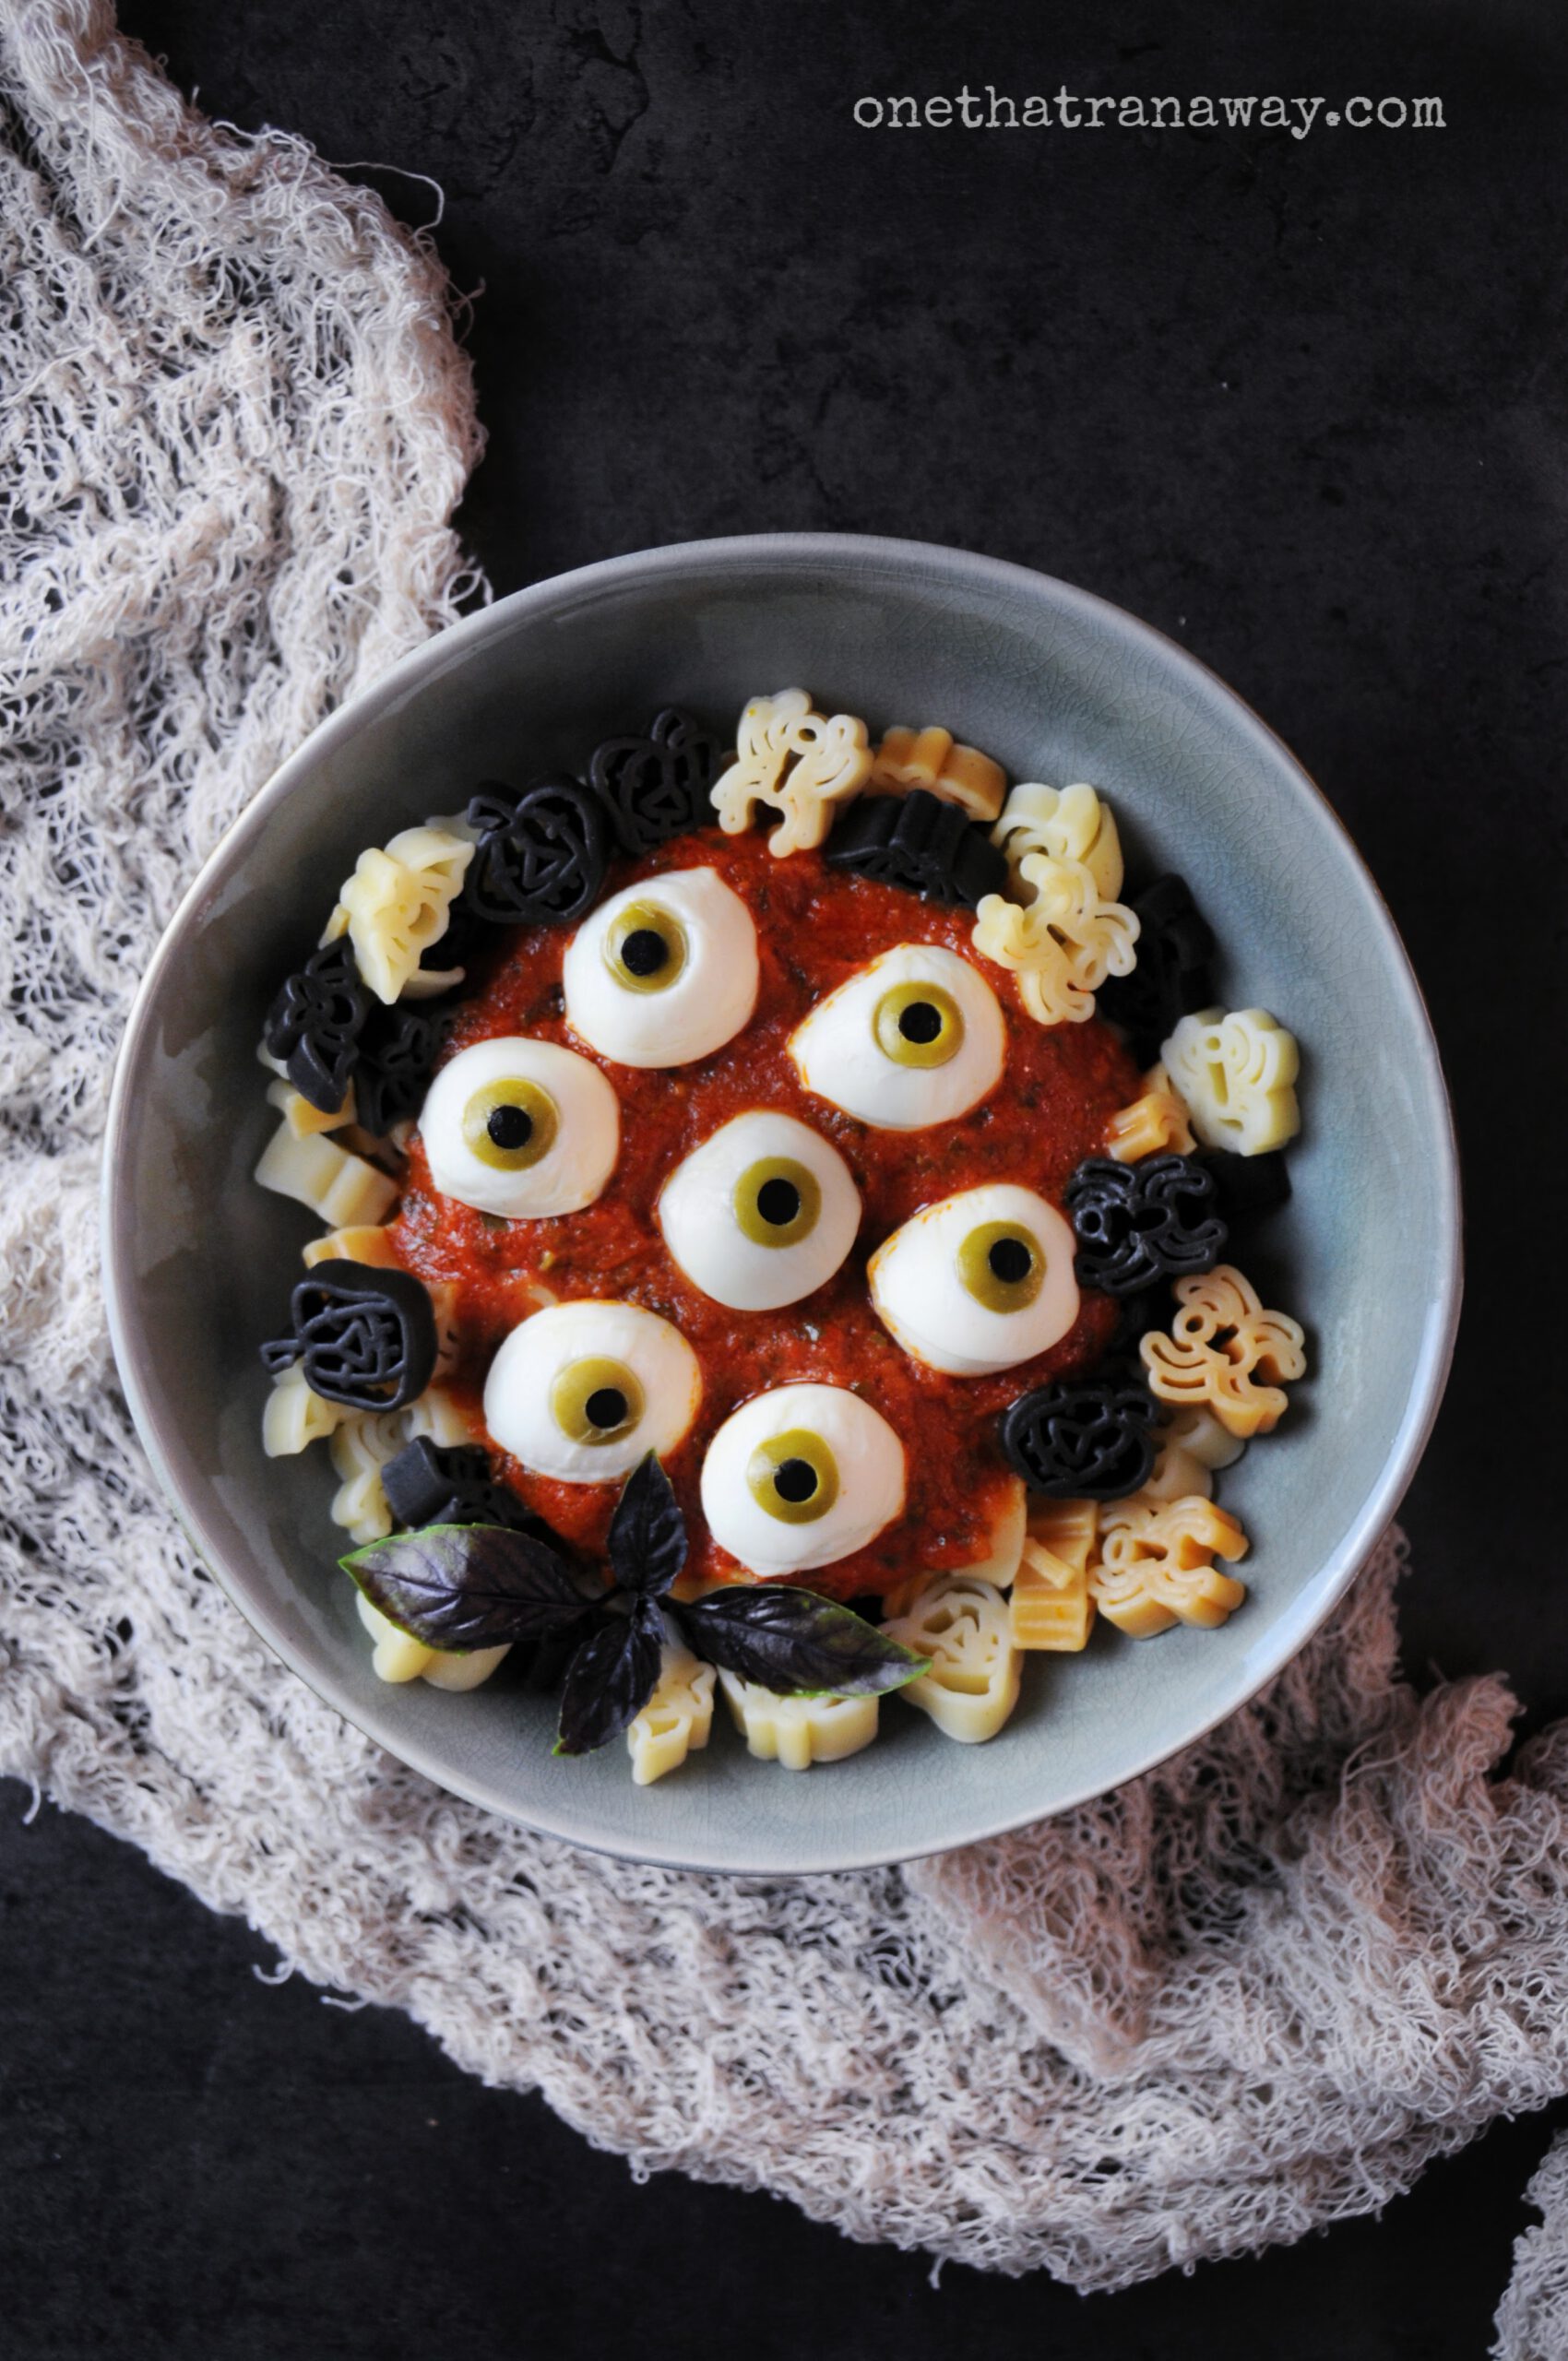 a plate with Halloween shaped pasta and eyeballs made from mozzarella on a dark background